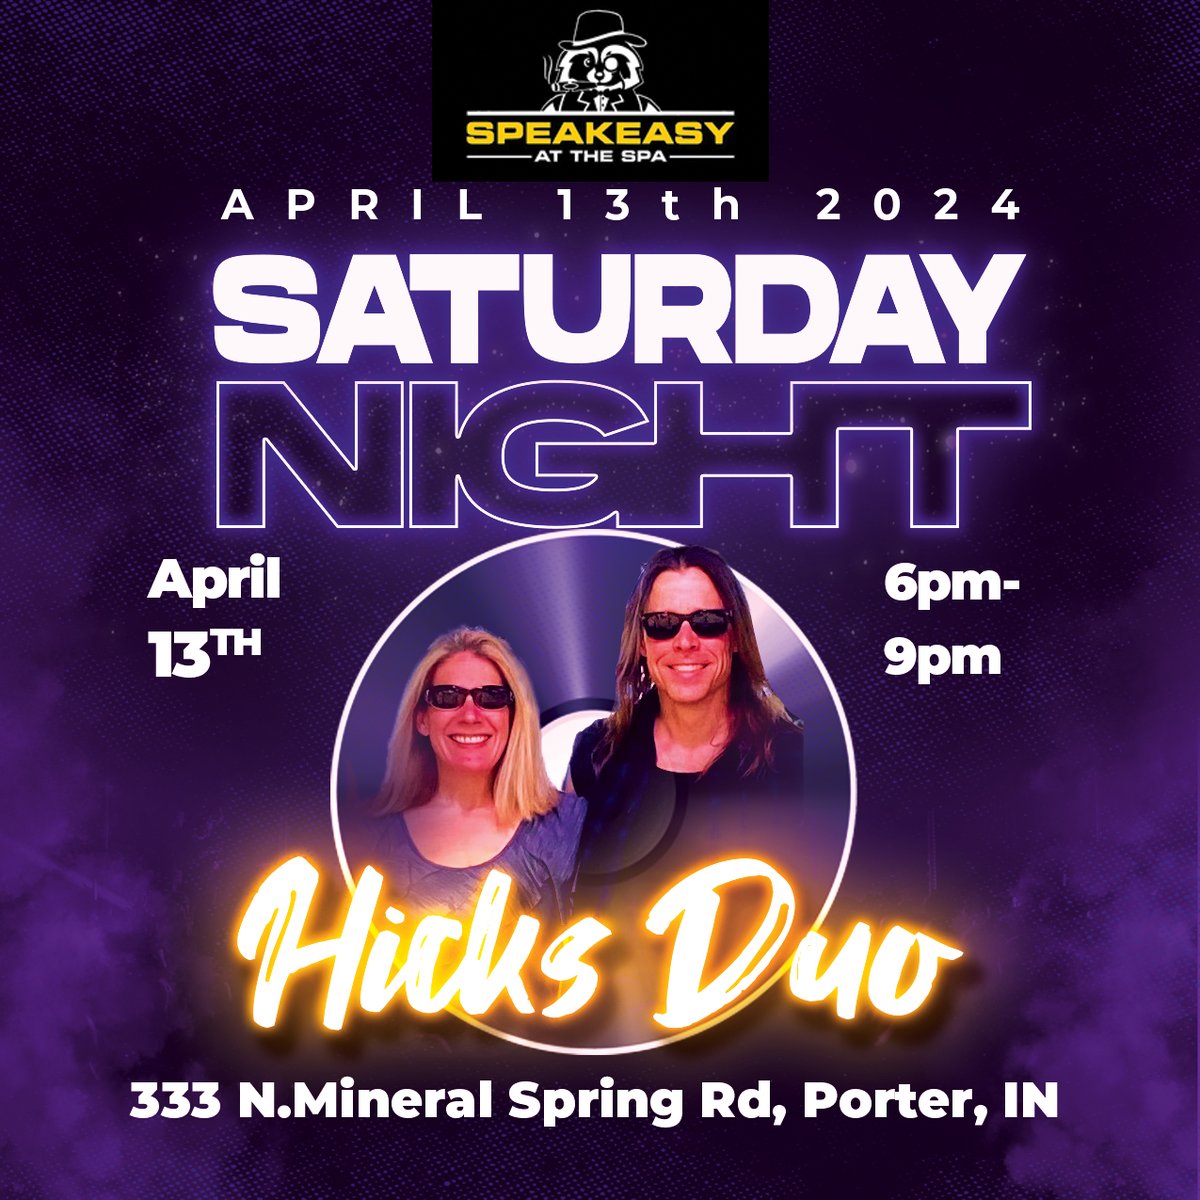 Don't miss out! Hicks Duo live music at #SpeakeasyattheSpa this Saturday night from 6 pm to 9 pm. Join us for a fantastic evening!
.
.
.
.
.
.
#livemusic #entertainment #musicevents #concertnight #LiveMusicExperience #porterindiana #Indiana #indianafoodies